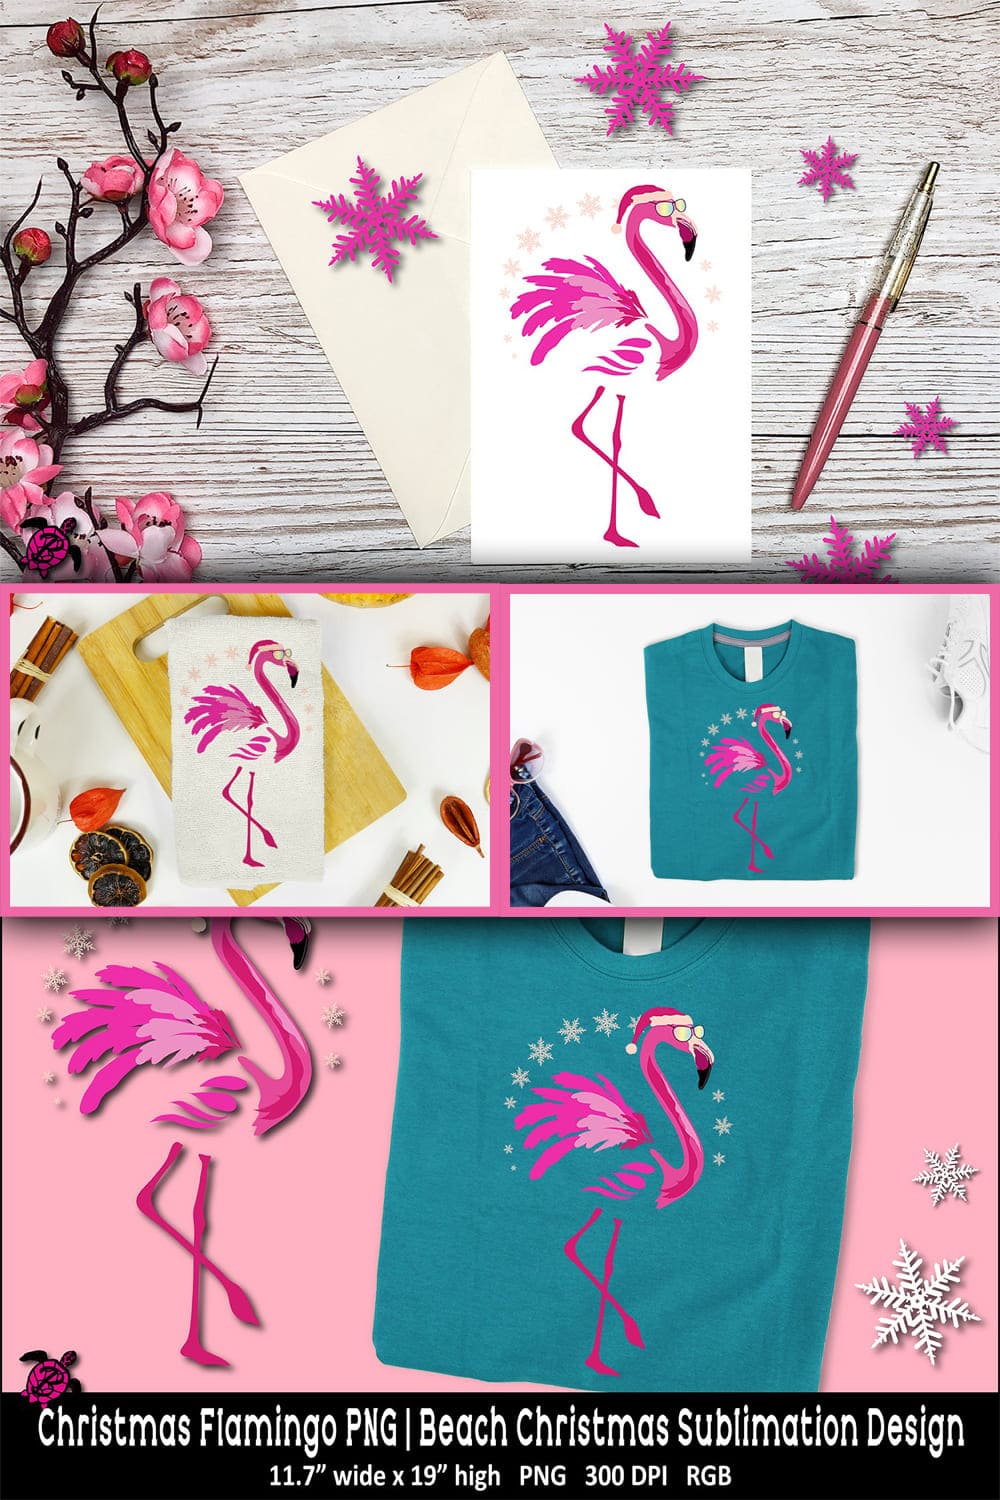 Christmas flamingo PNG beach christmas sublimation, picture for Pinterest 1000x1500.